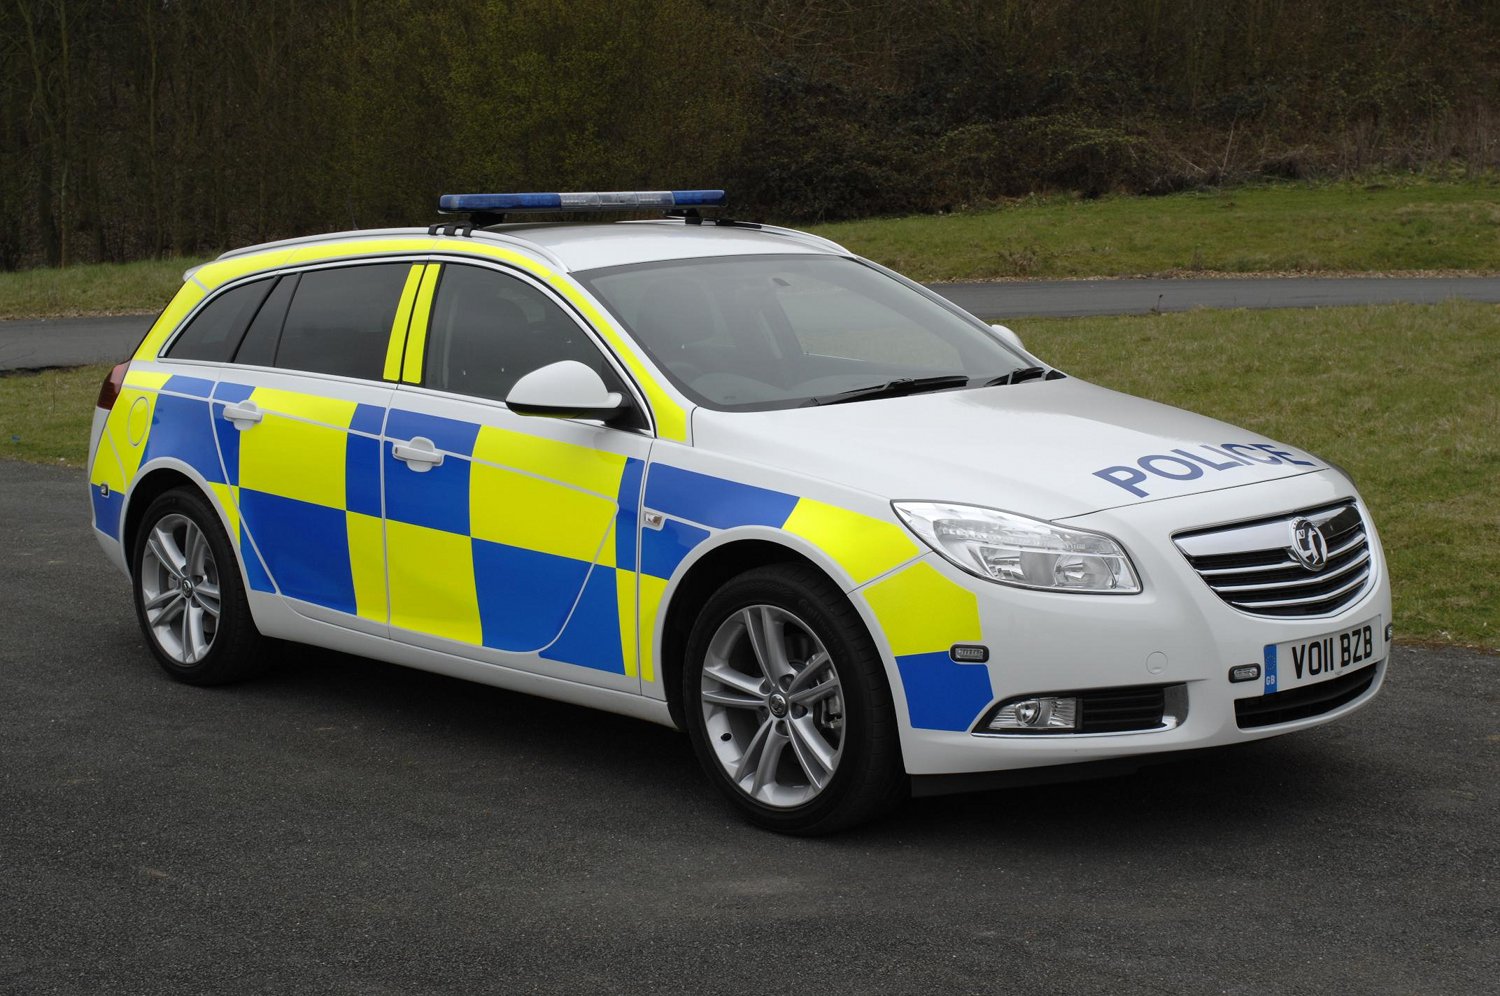 vauxhall-insignia-police-car-flexes-its-muscles-for-french-law-enforcers-34681_1.jpg